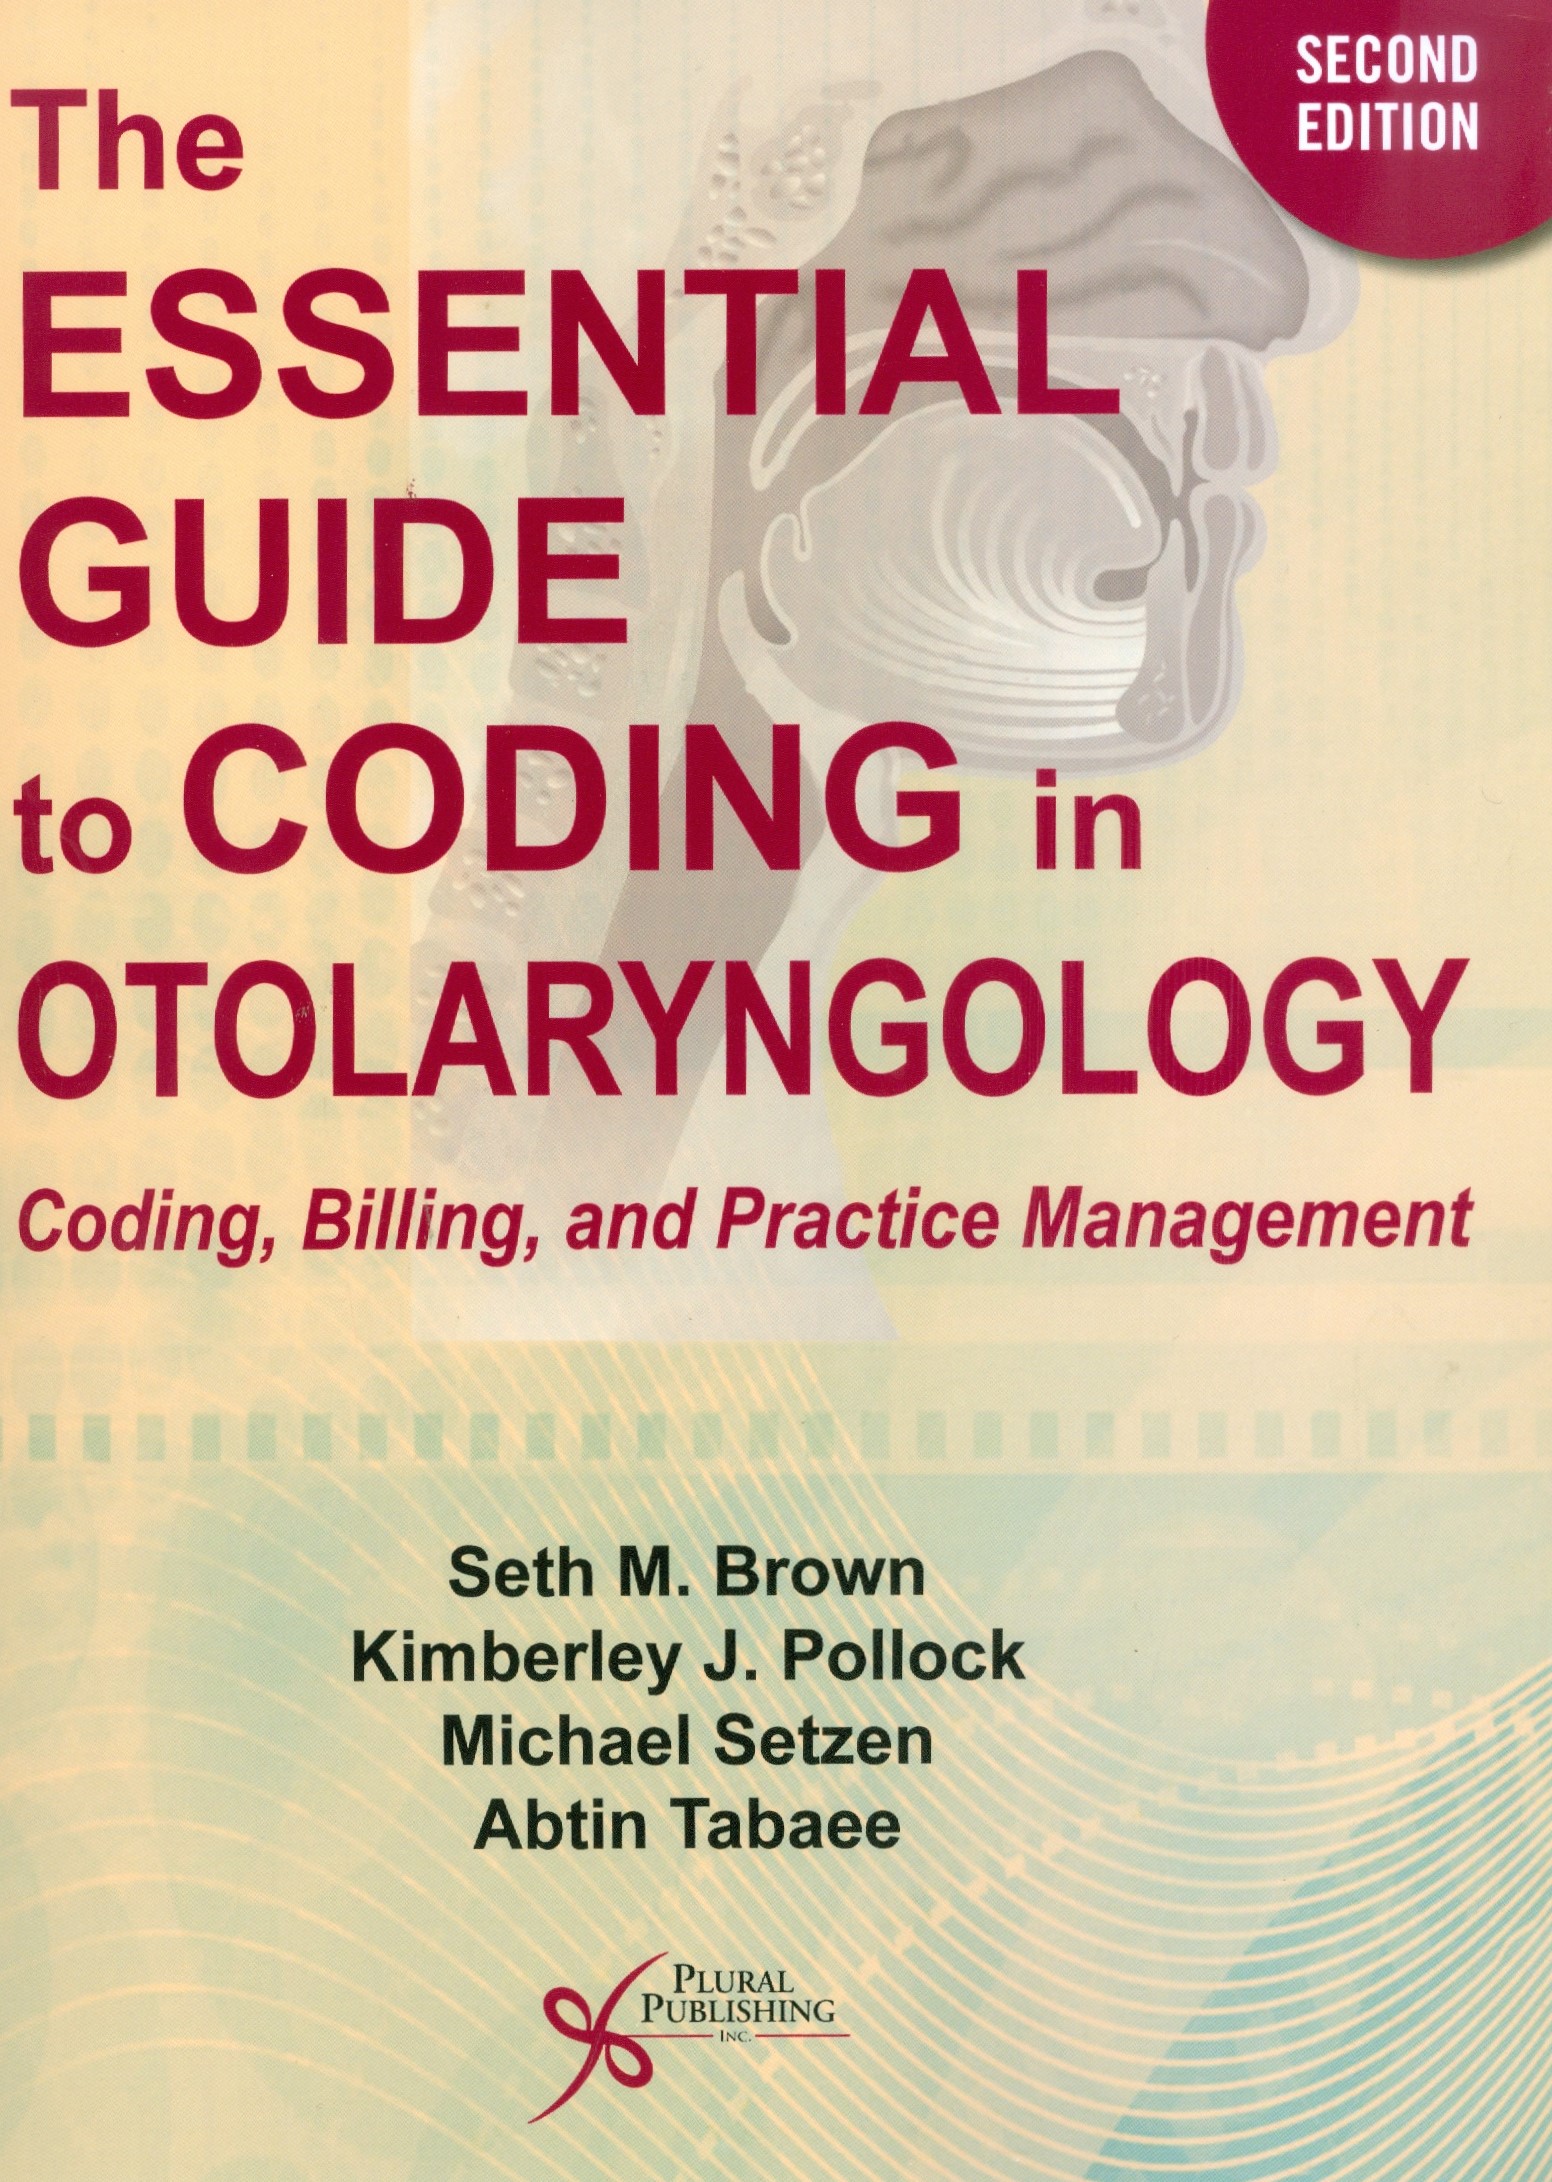 The Essential Guide to Coding in Otolaryngology: Coding, Billing, and Practice Management, 2nd edn